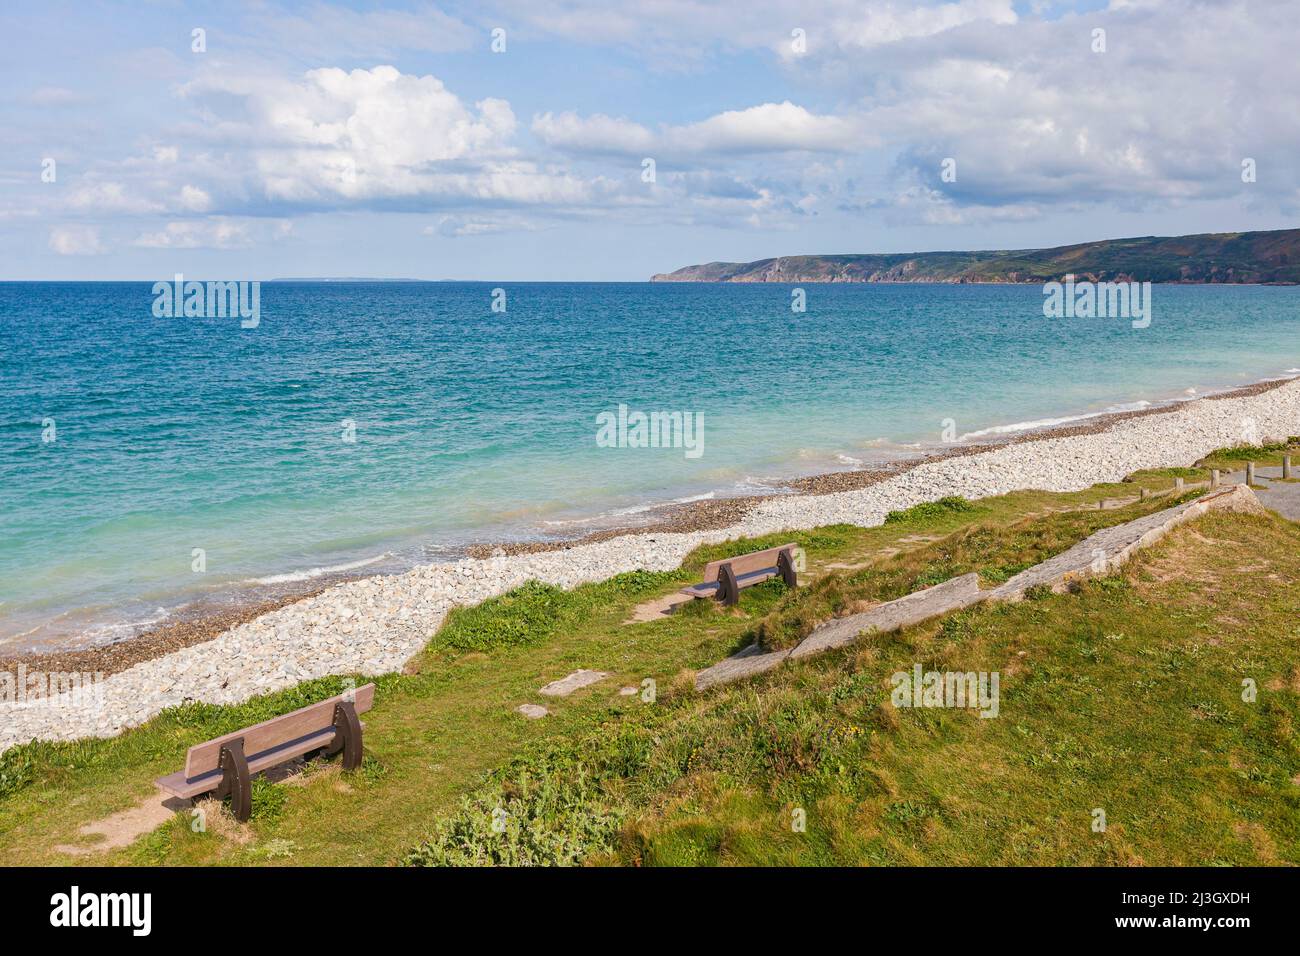 France, Manche, Cotentin, Cape Hague, Vauville, turquoise blue sea and Vauville cove beach, listed as a Natura 2000 site, crossed by the GR223 coastal path Stock Photo